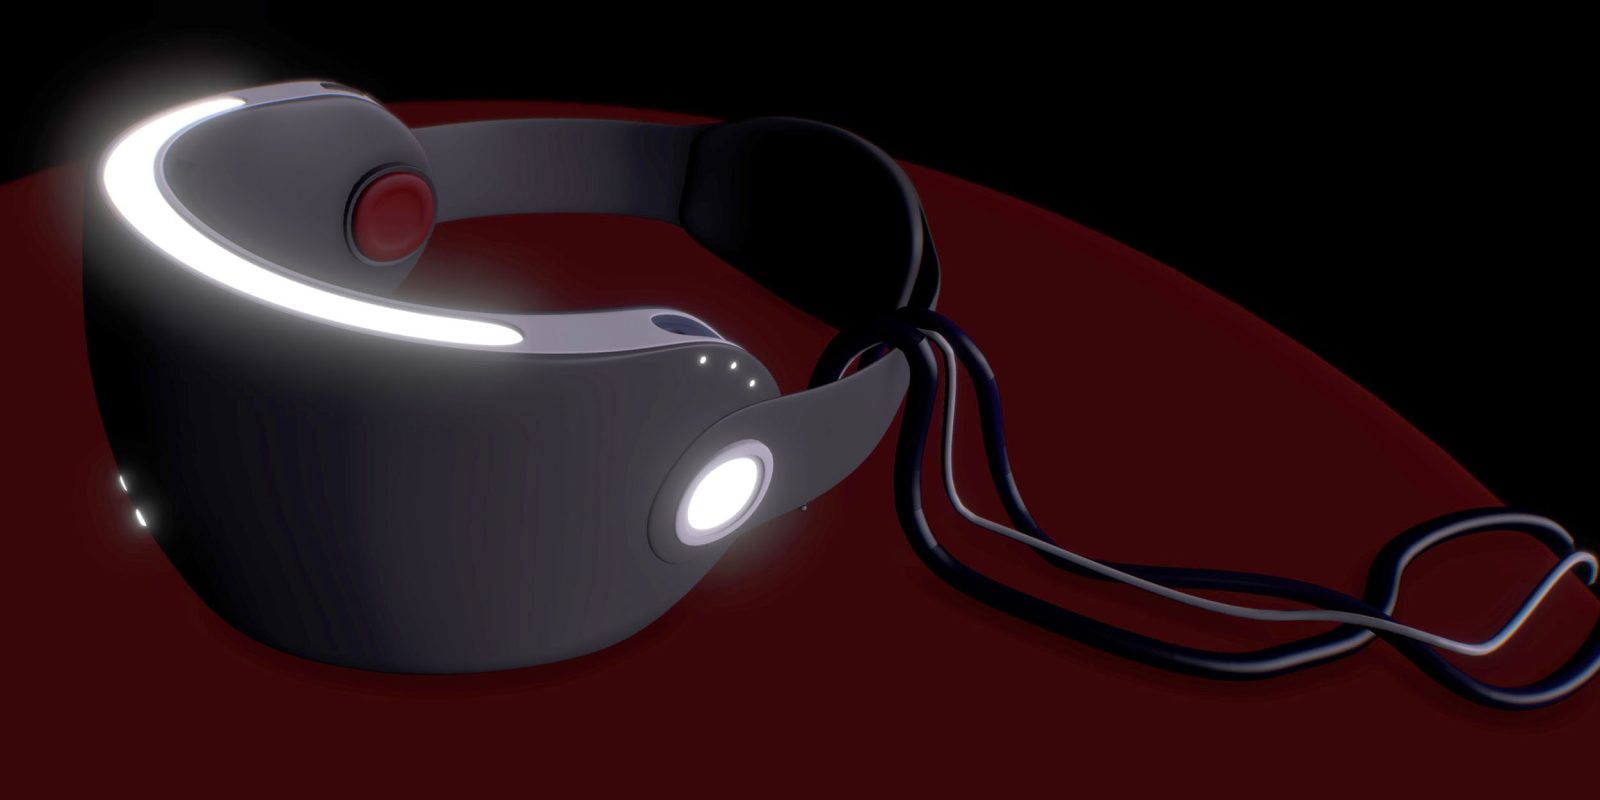 Apple's first headset will be the Mac Pro of VR devices – report - 9to5Mac